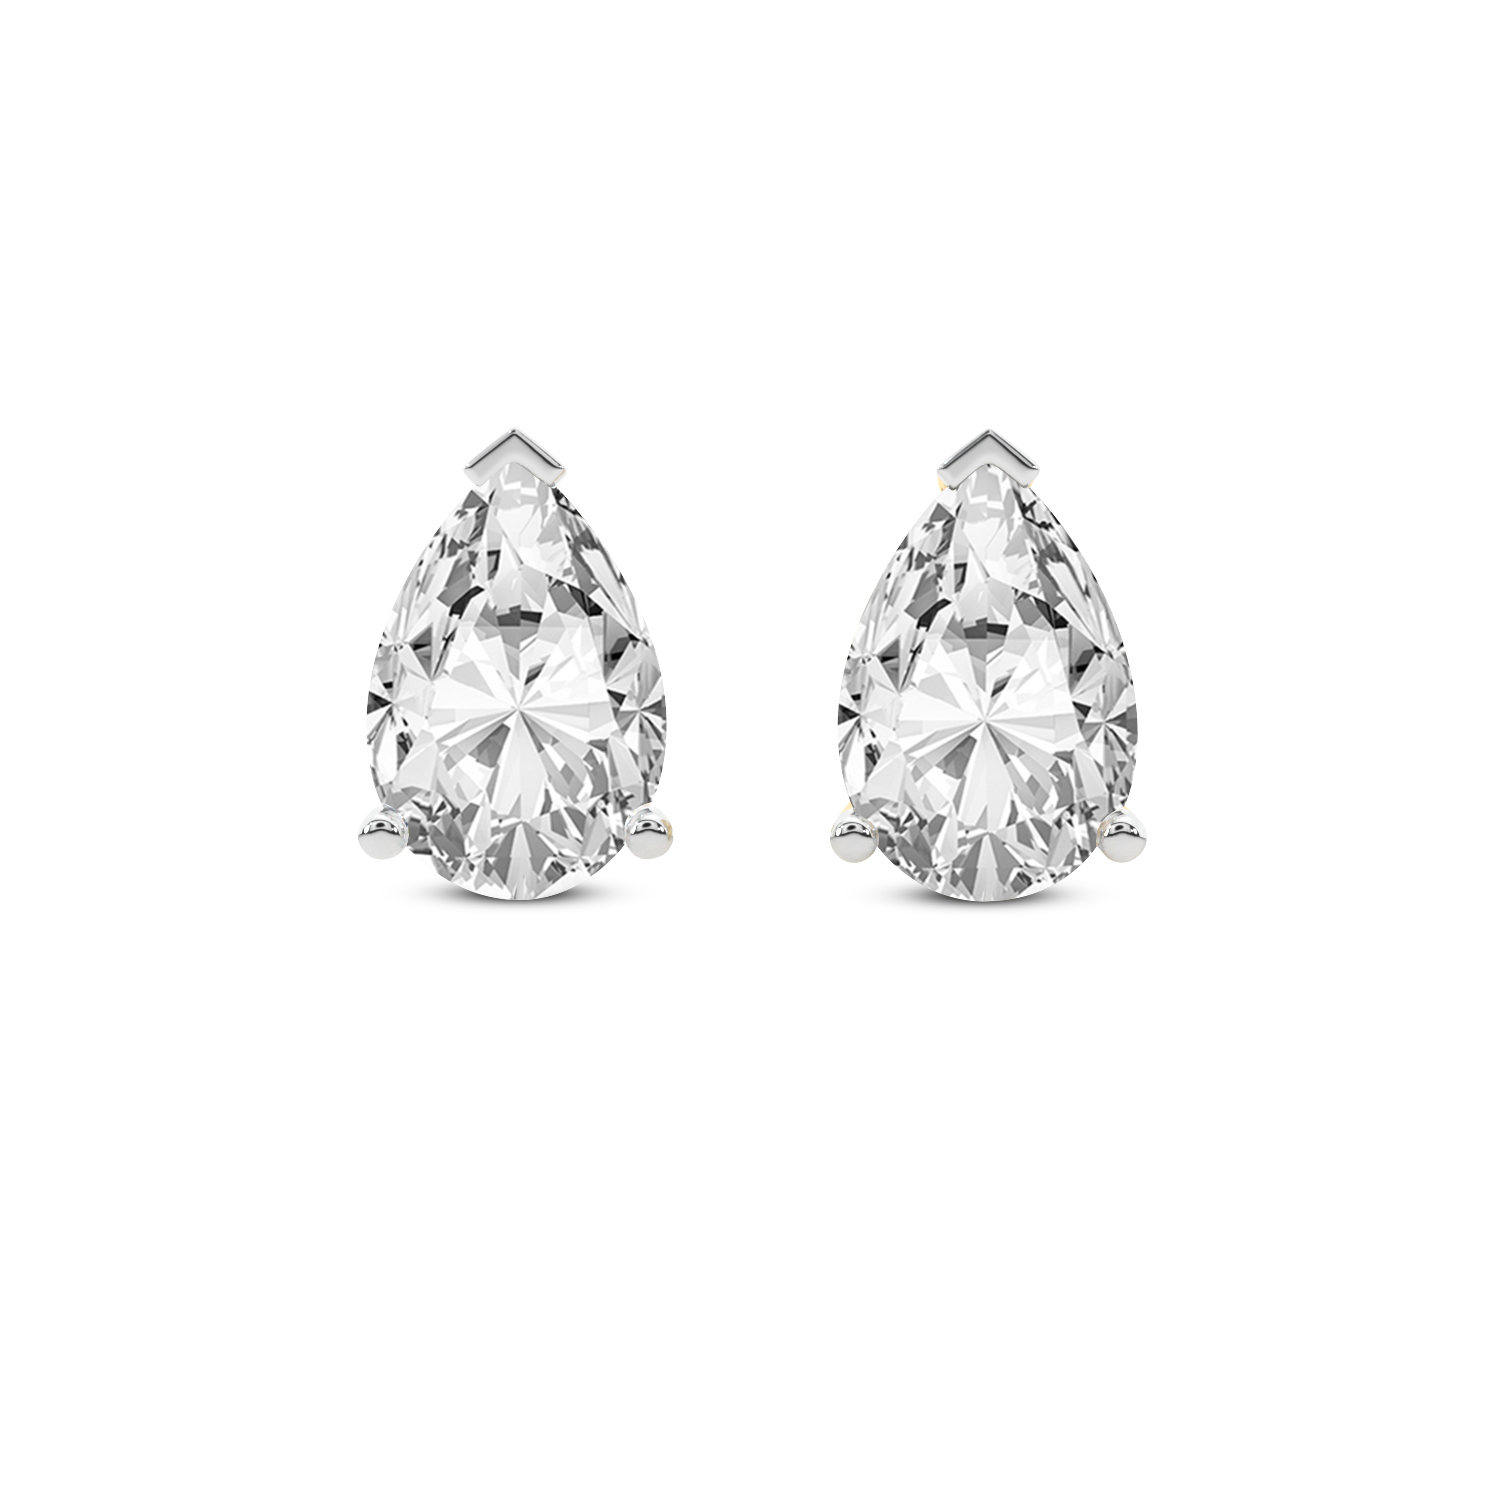 3 Prong Pear Lab Diamond Stud Earrings yellow gold earring, small front view